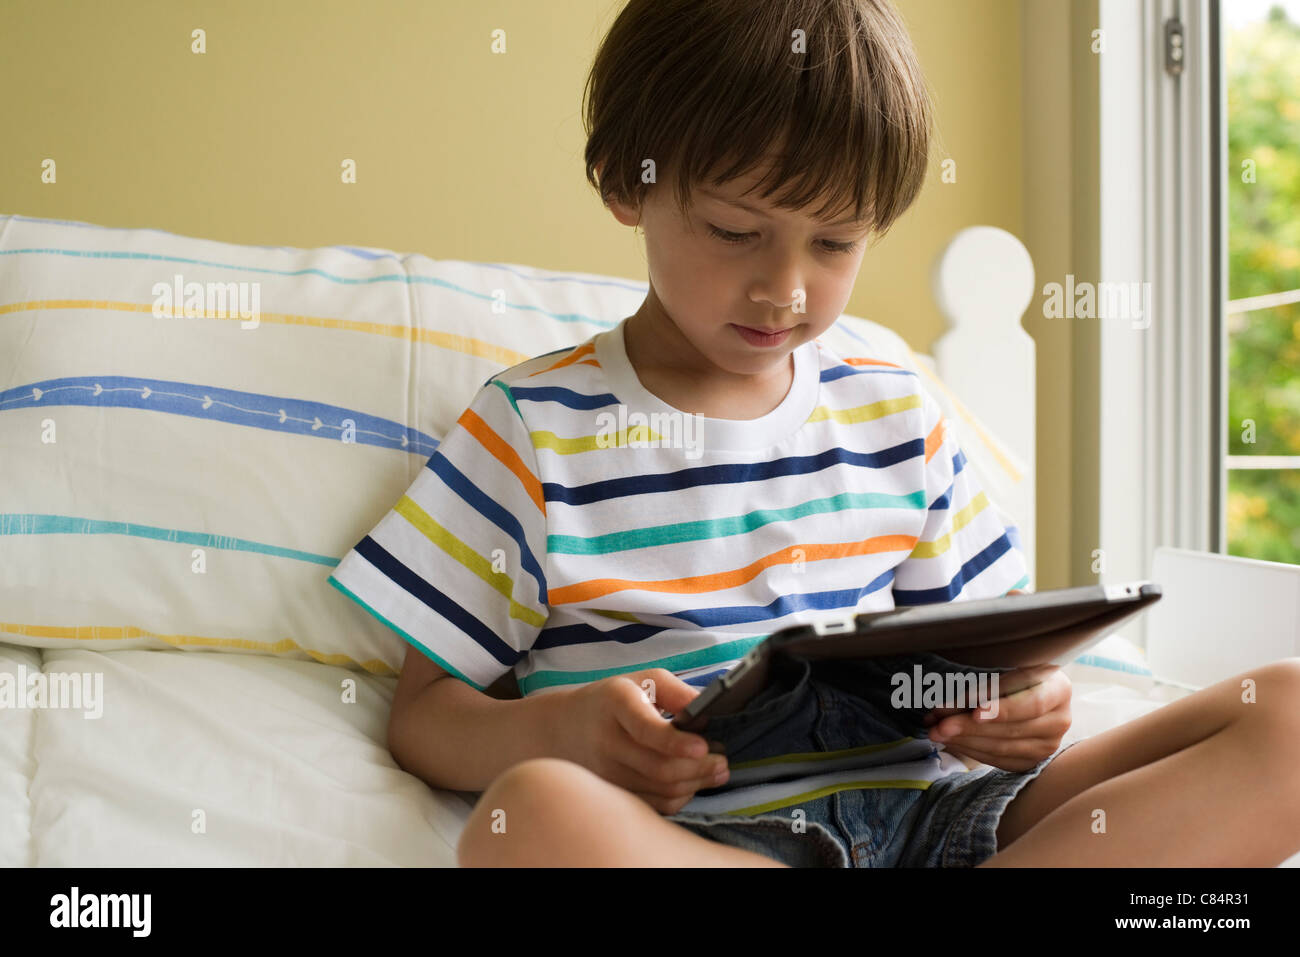 Boy sitting on bed, using digital tablet Stock Photo